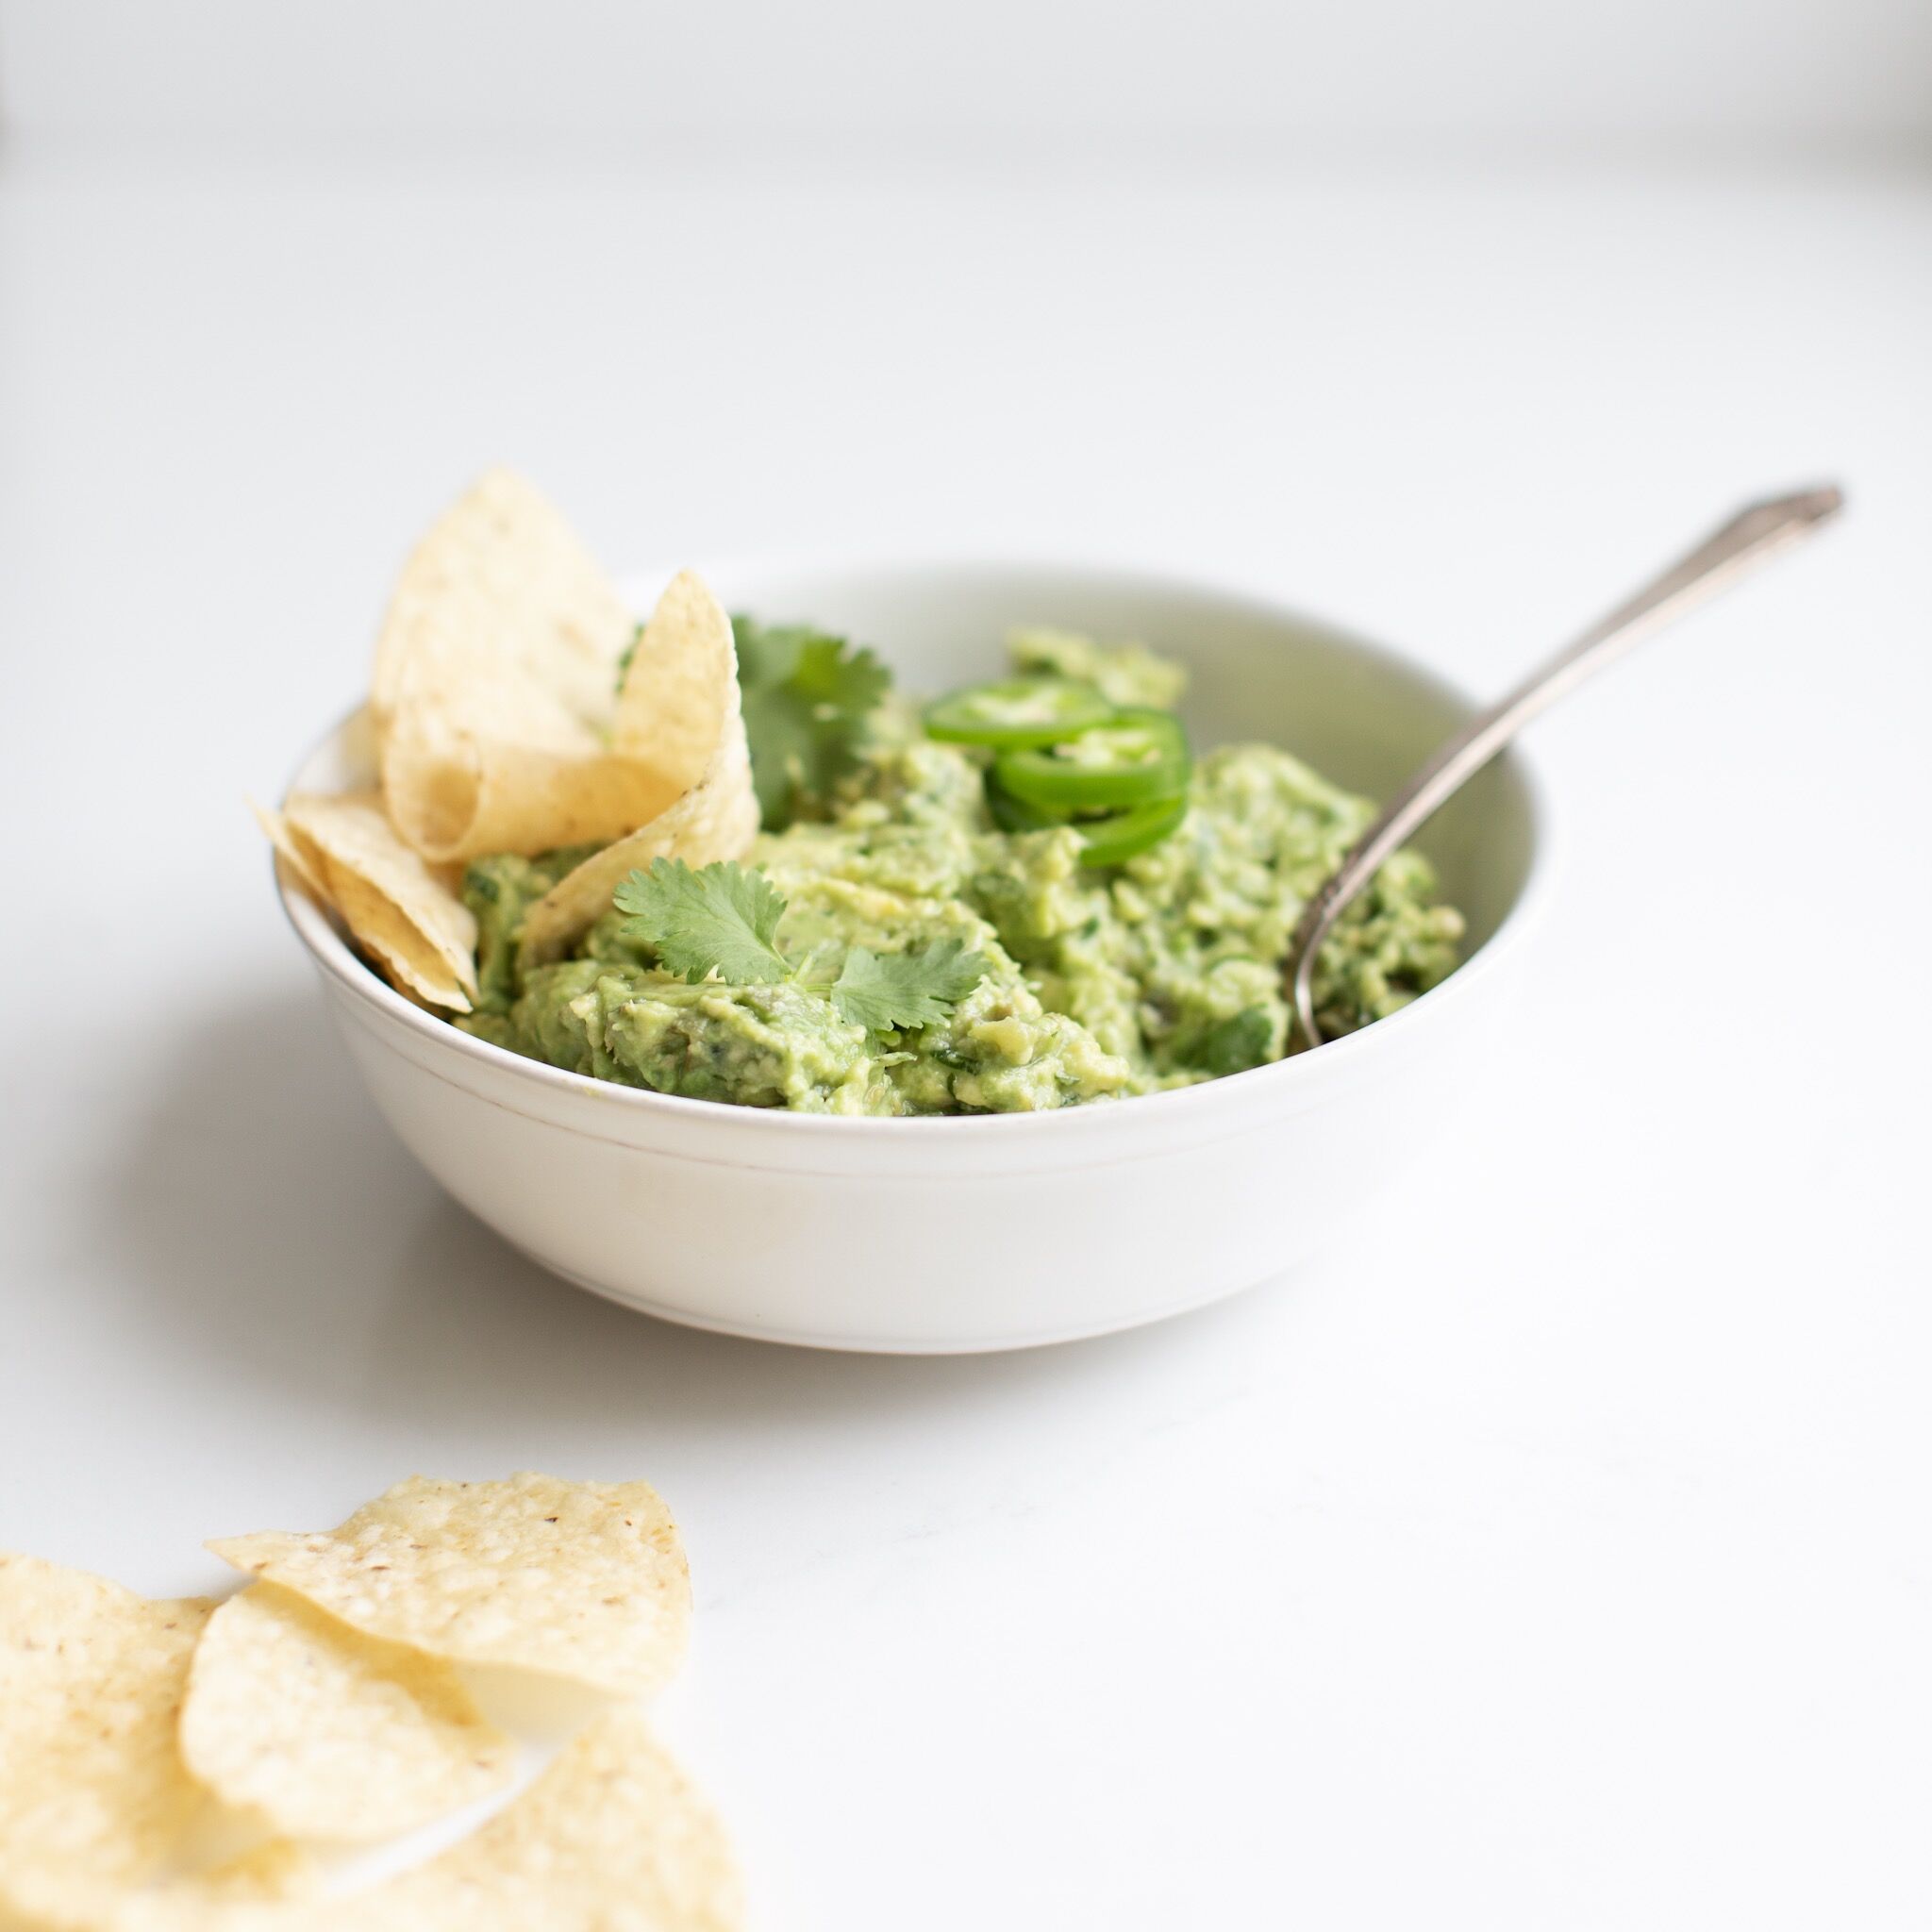 Cheryl's Guacamole - a perfect zippy and slightly spicy guacamole that will be a crowd favourite and is naturally gluten free and vegan!